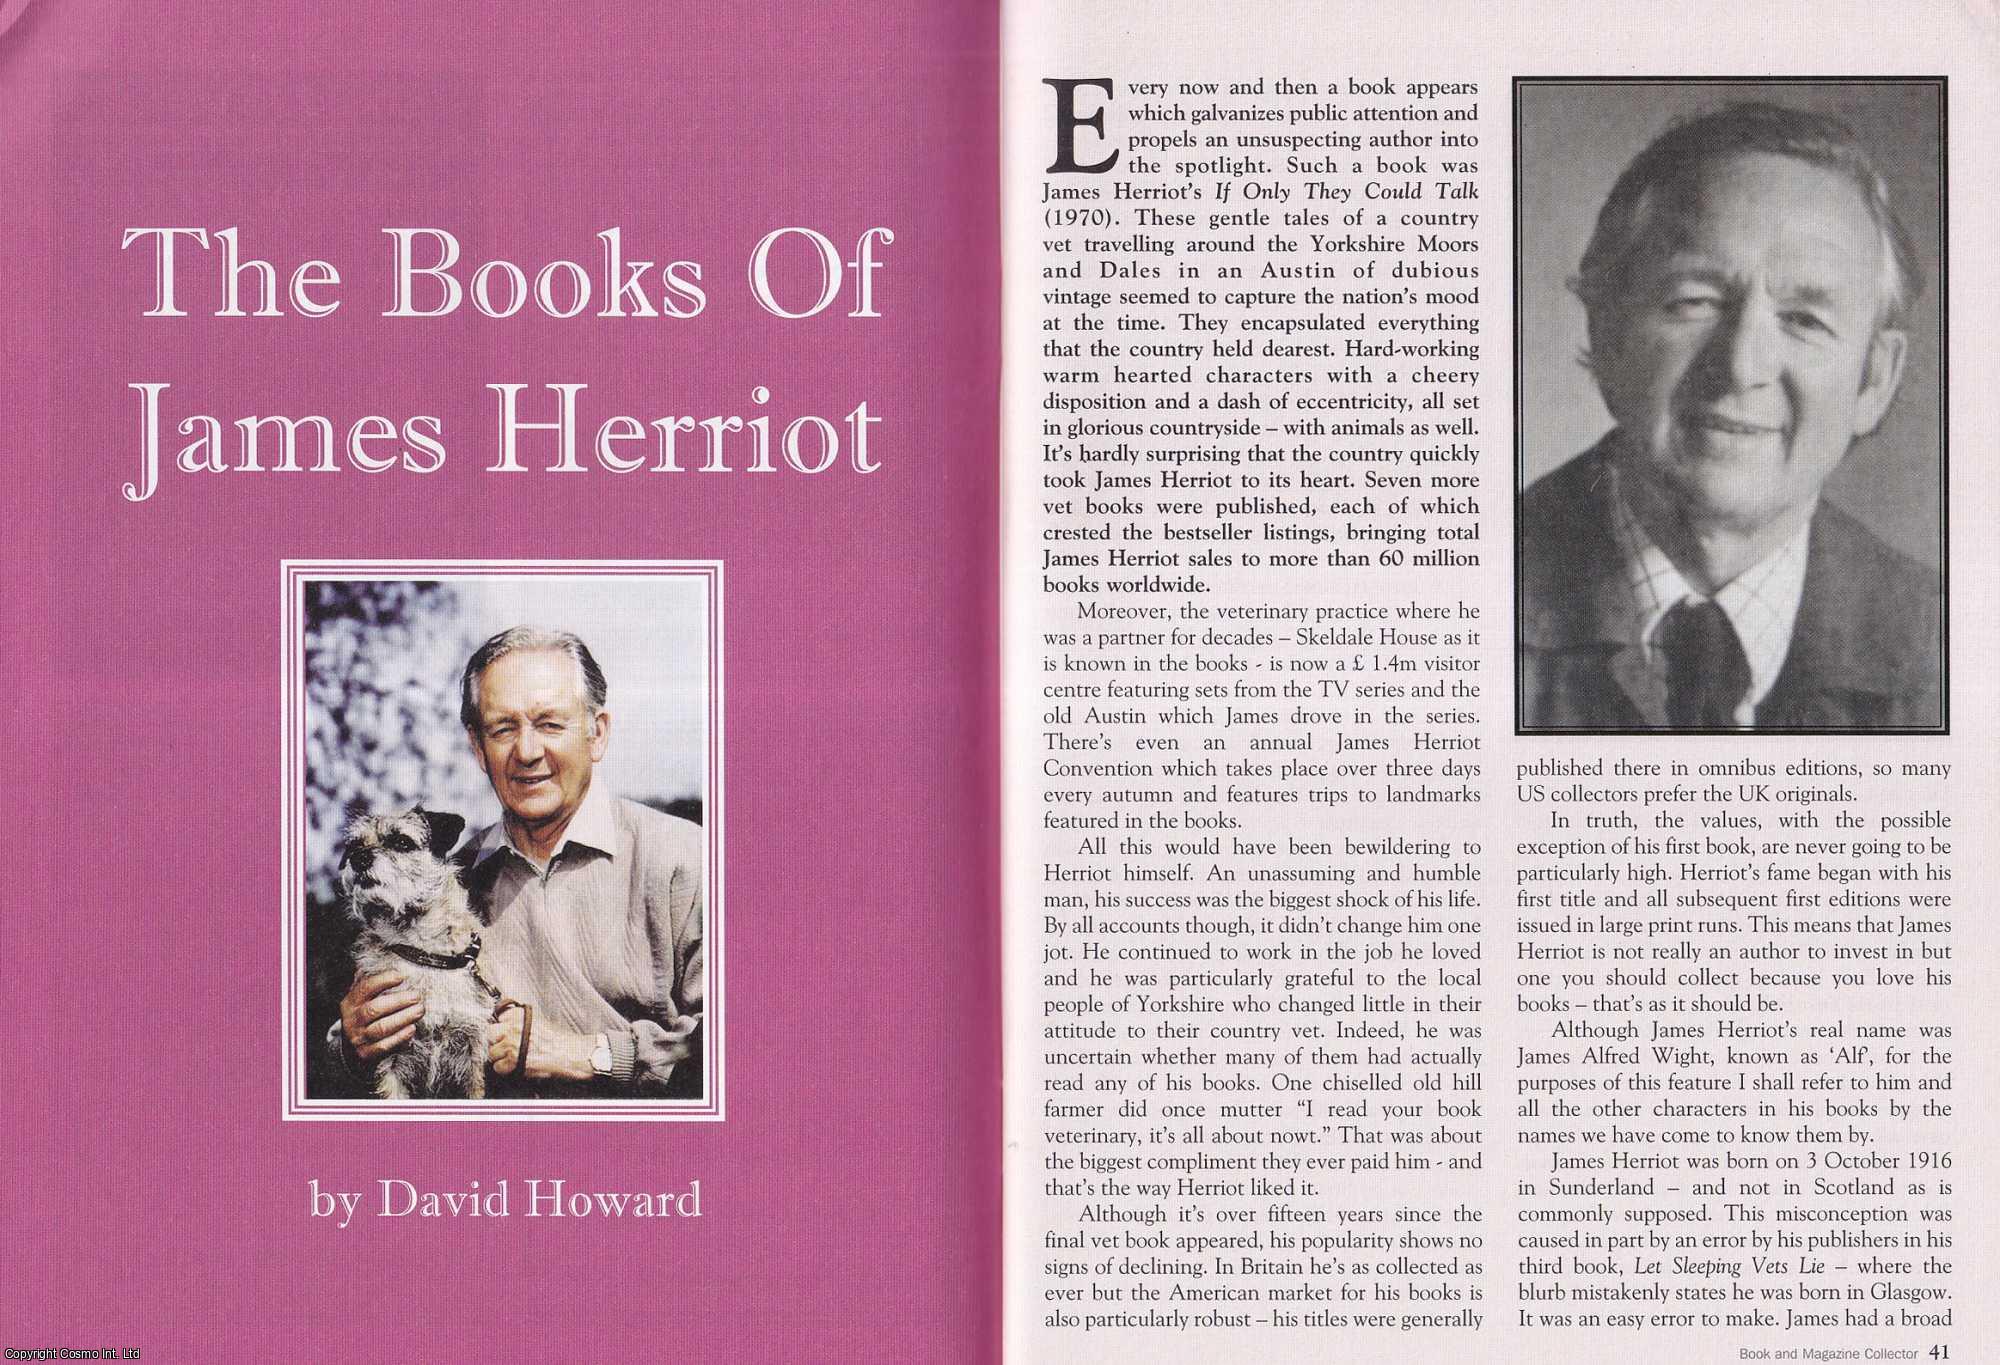 David Howard - The Books of James Herriot. This is an original article separated from an issue of The Book & Magazine Collector publication, 2008.